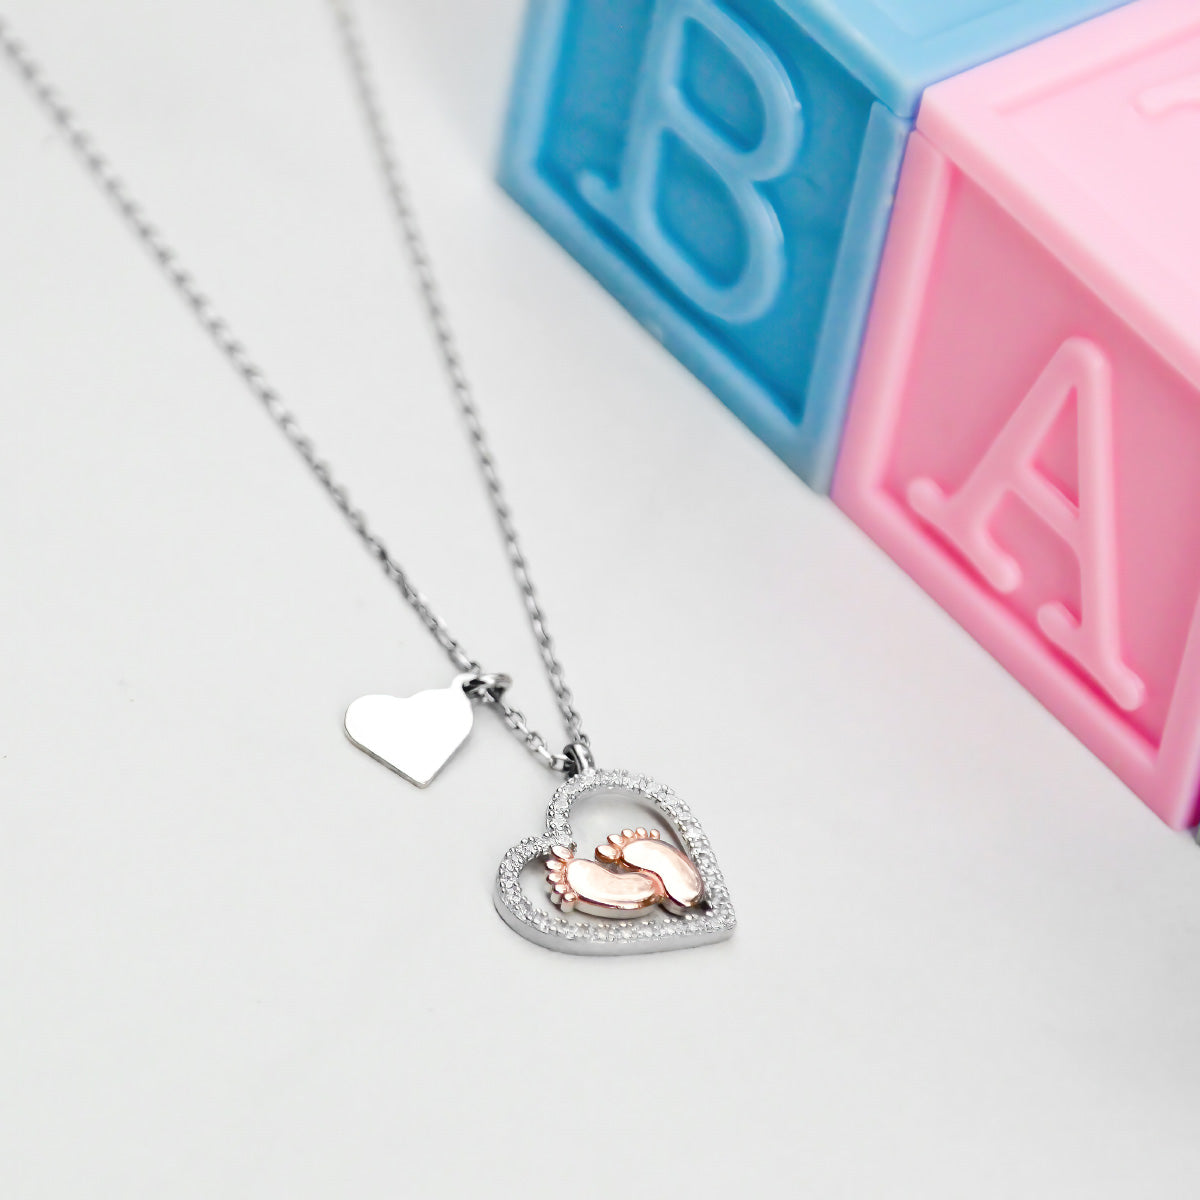 Mother of Twins - Baby Feet Heart Pendant Necklace Gift Set